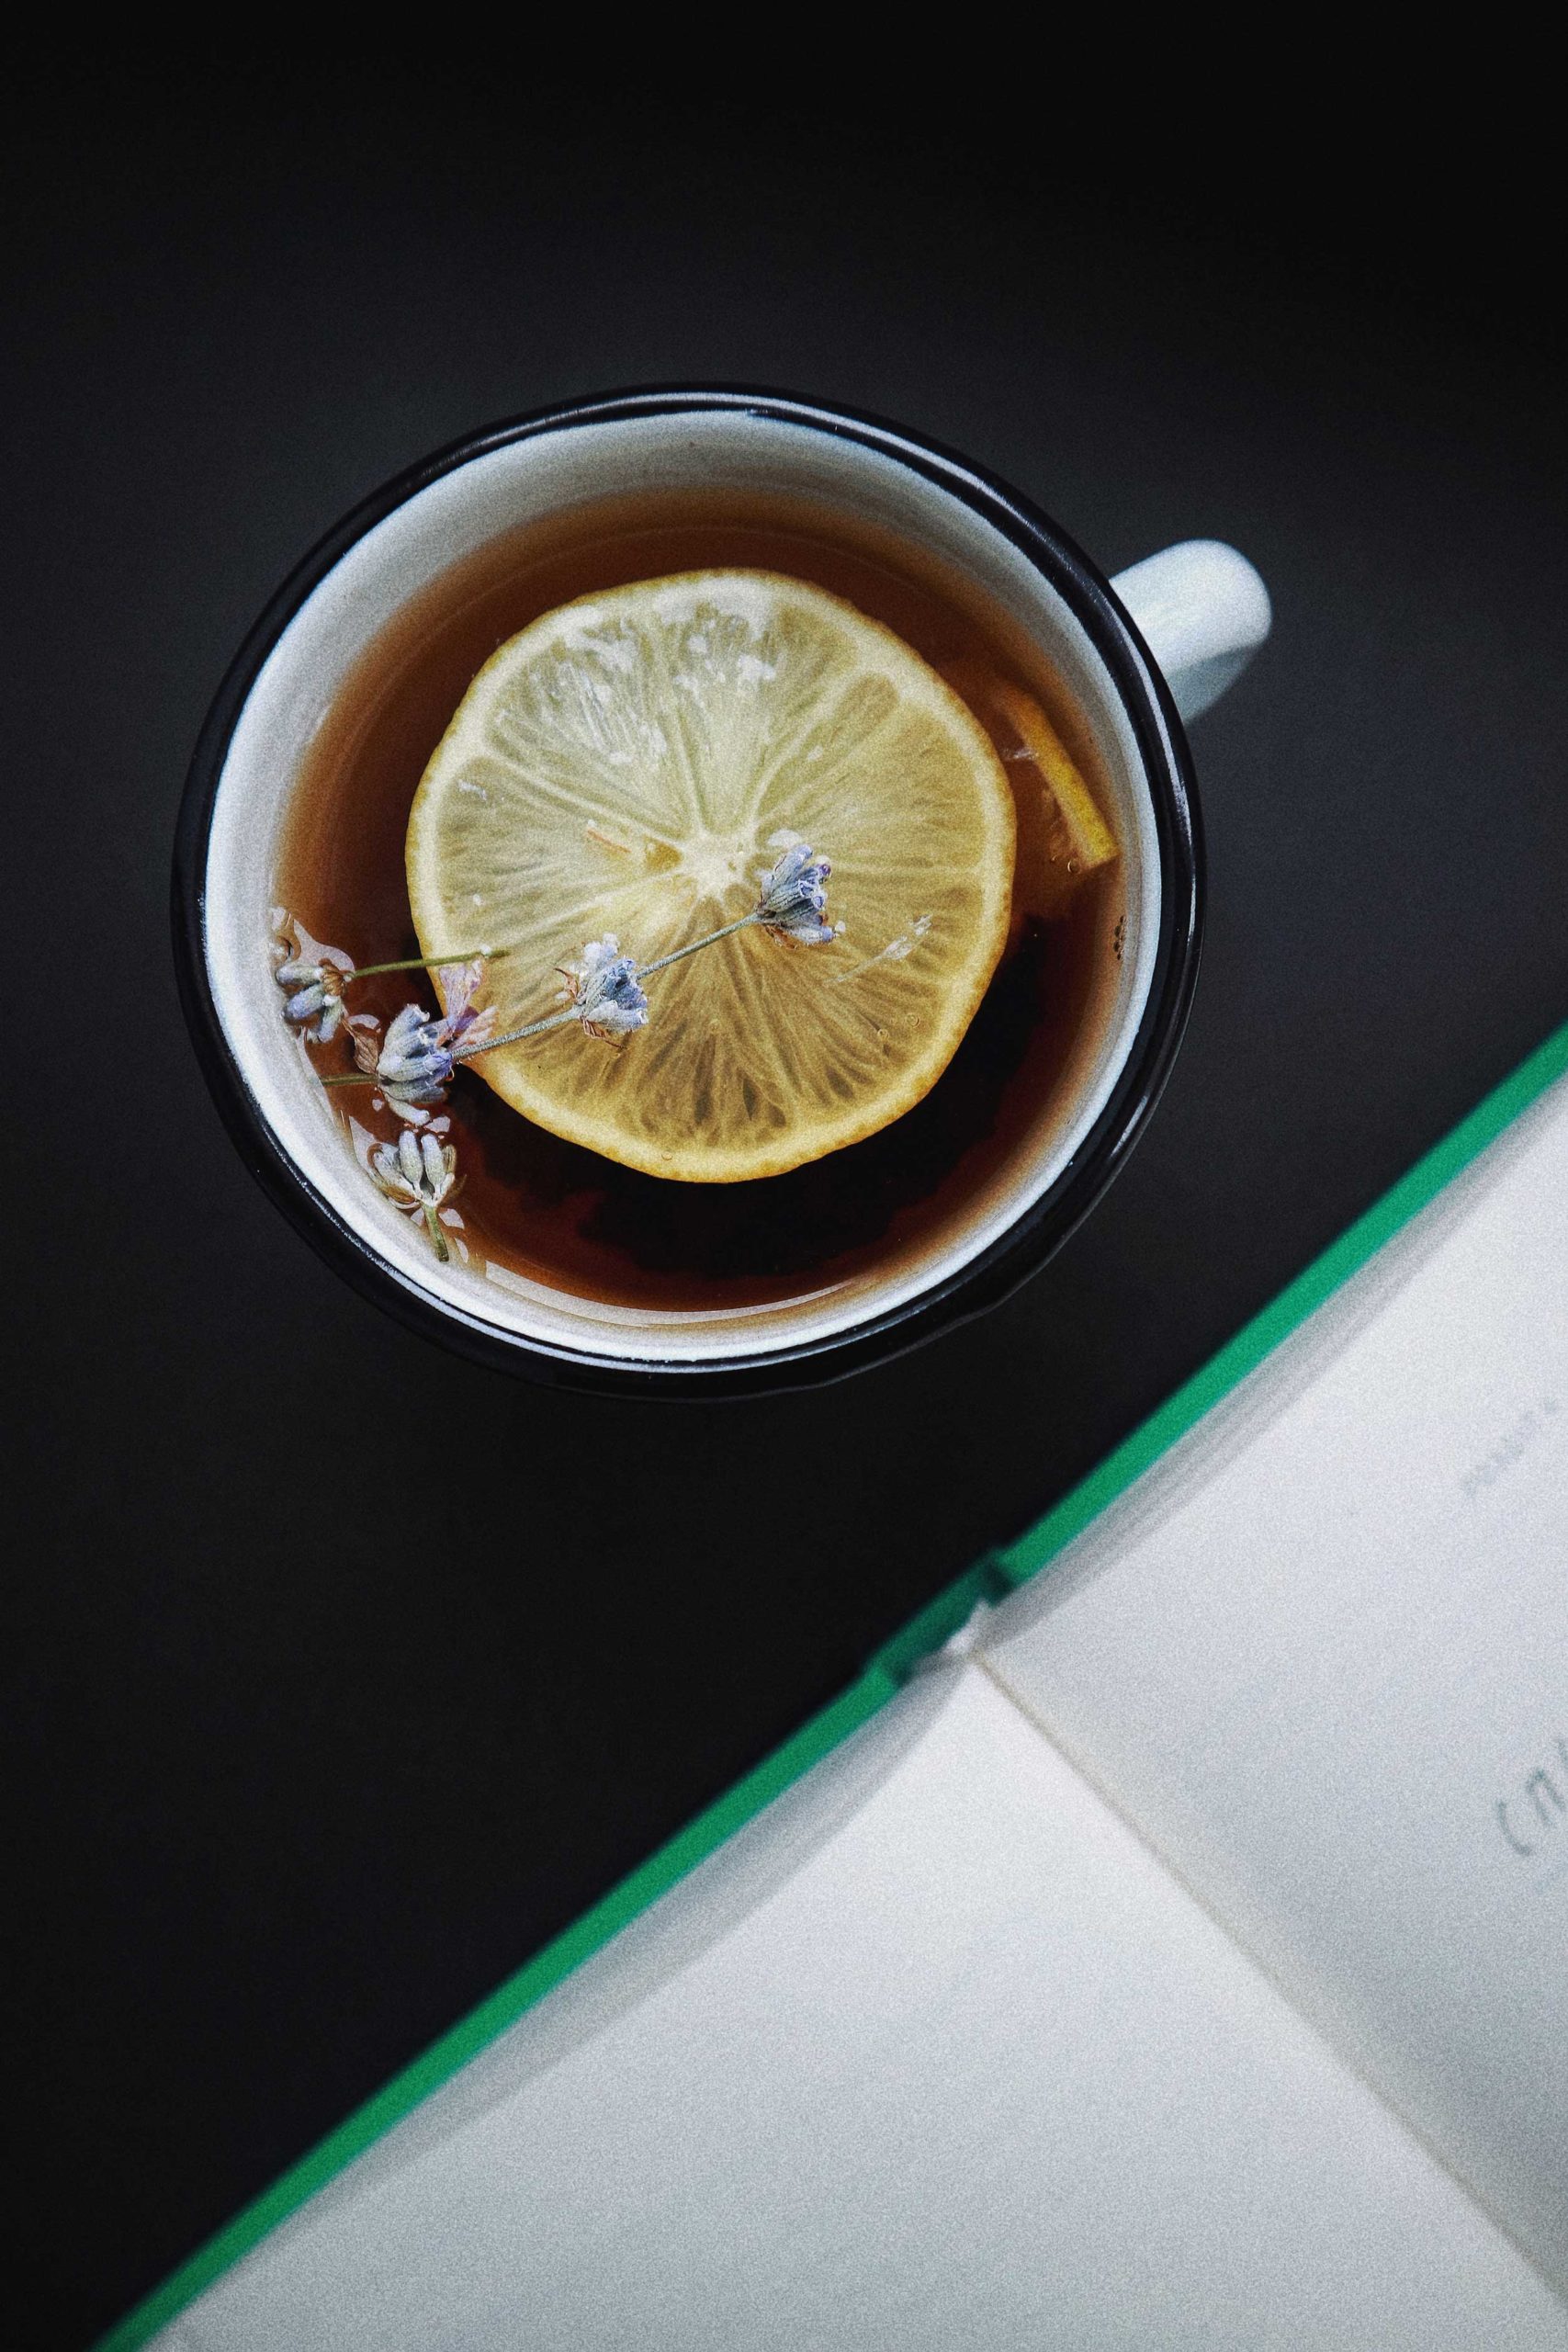 Aerial view of hot tea with lemon slice floating on the surface